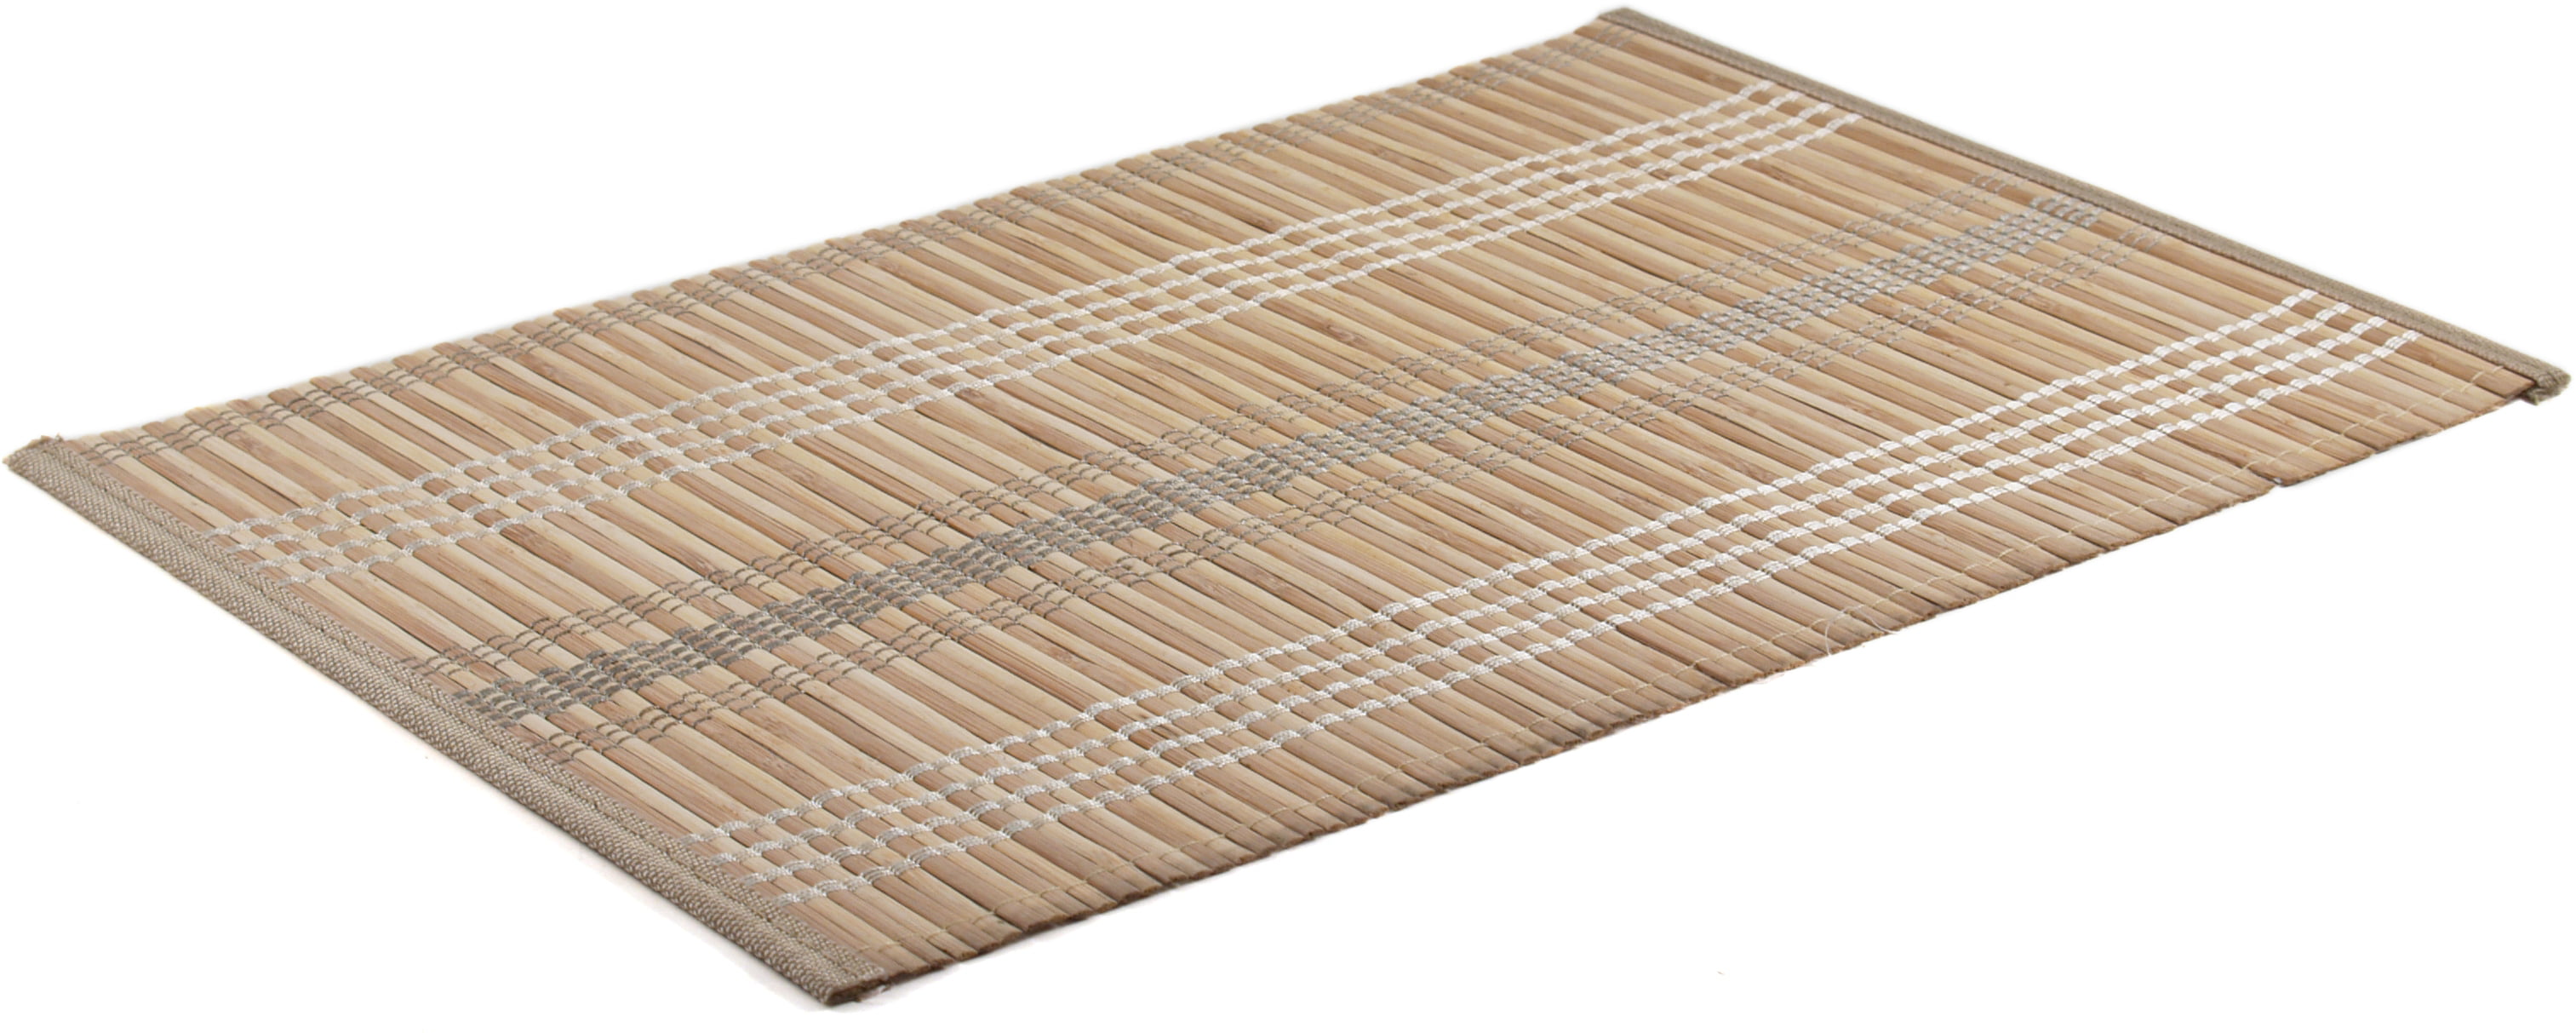 Natural Threaded Bamboo Placemat, of 4 - Walmart.com